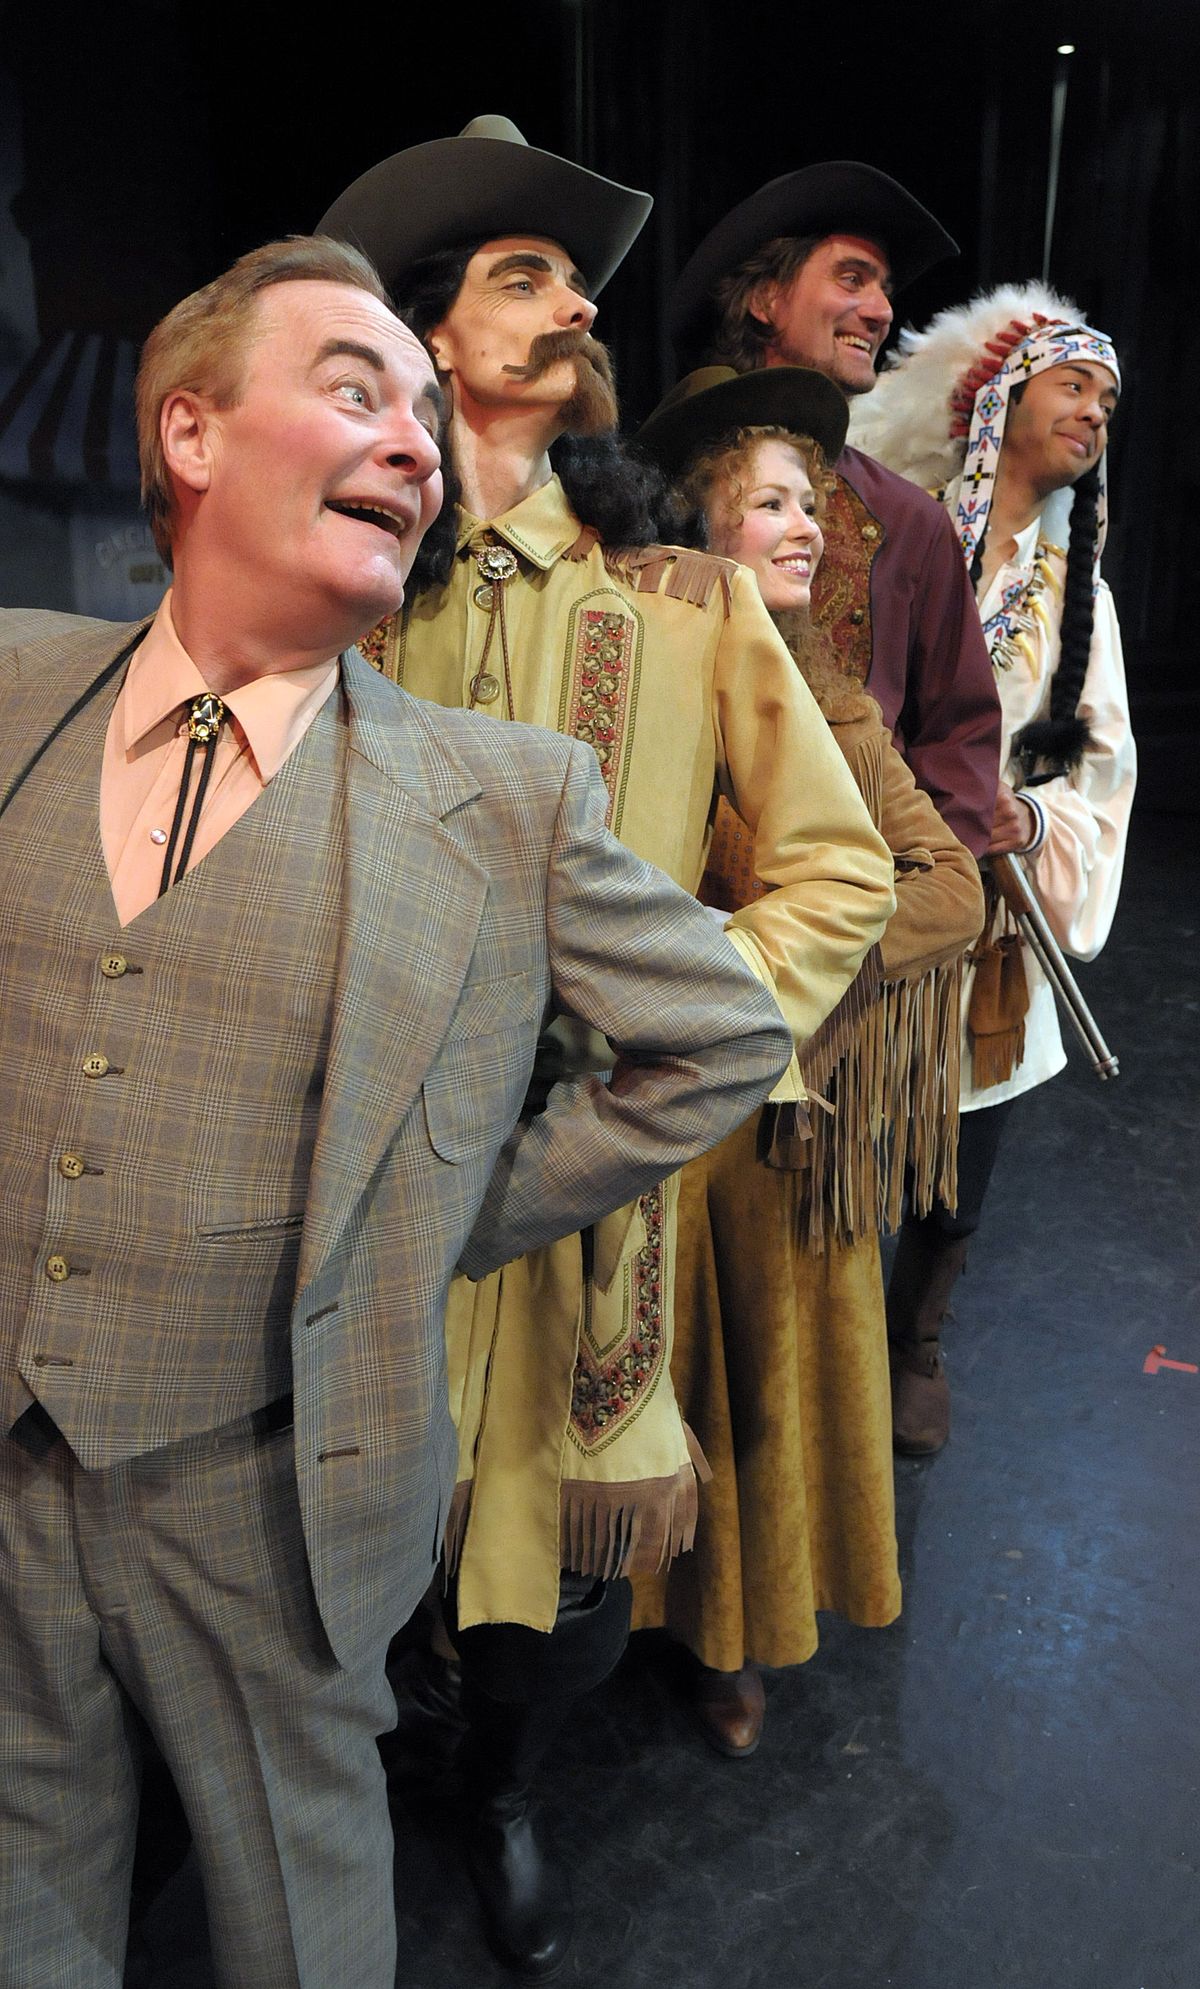 From left, Gary Pierce, Doug Dawson, Tami Knoell, Patrick McHenry-Kroetch and Paul Villabrille in Civic Theatre’s production of “Annie Get Your Gun.” (Christopher Anderson)